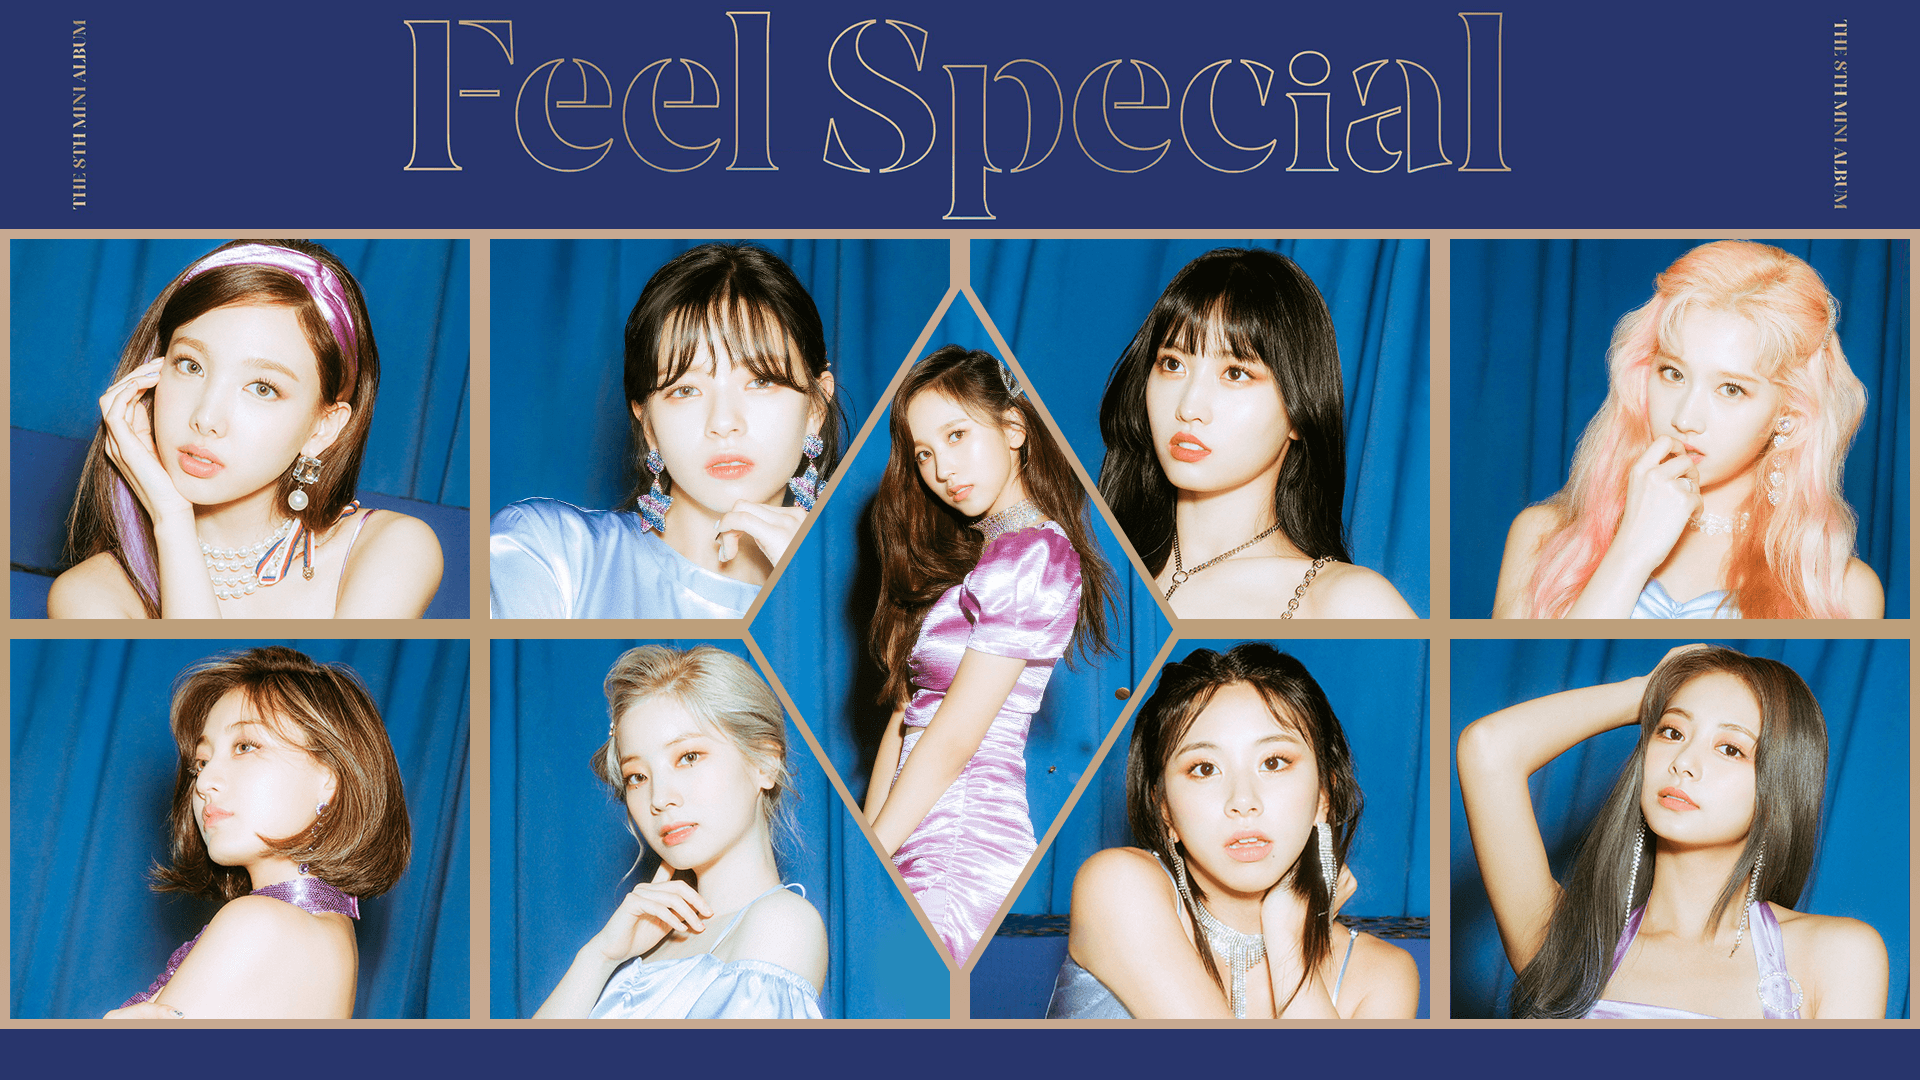 Twice Feel Special Wallpapers